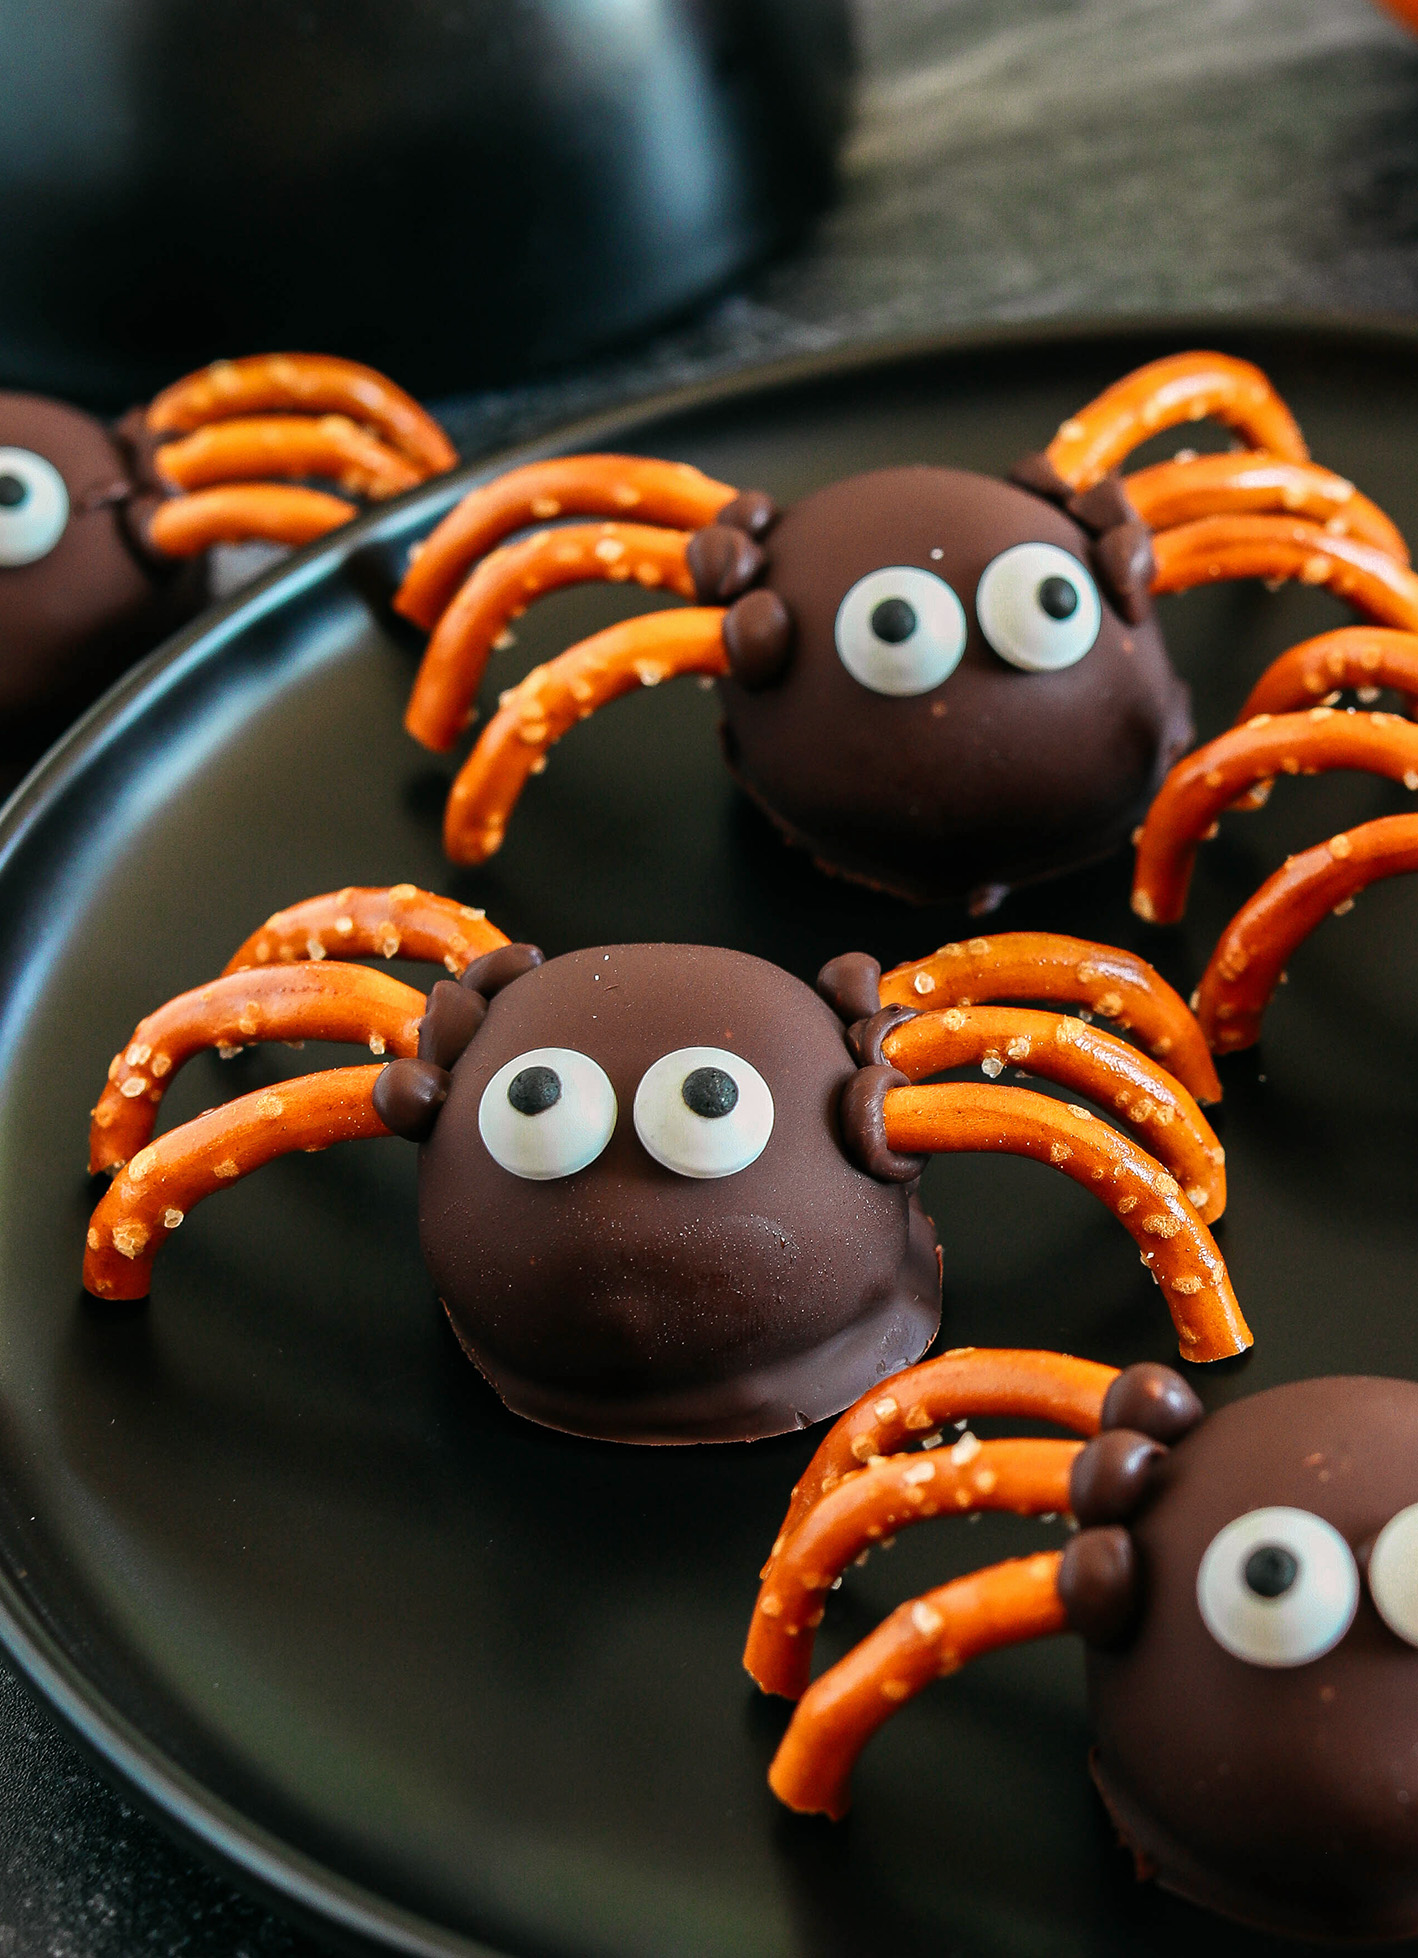 Get festive this Halloween with these tasty Chocolate Peanut Butter Spider Balls made with just 5 simple ingredients and zero baking required!  The perfect sweet and salty treats that are easy to make and your kids will love!